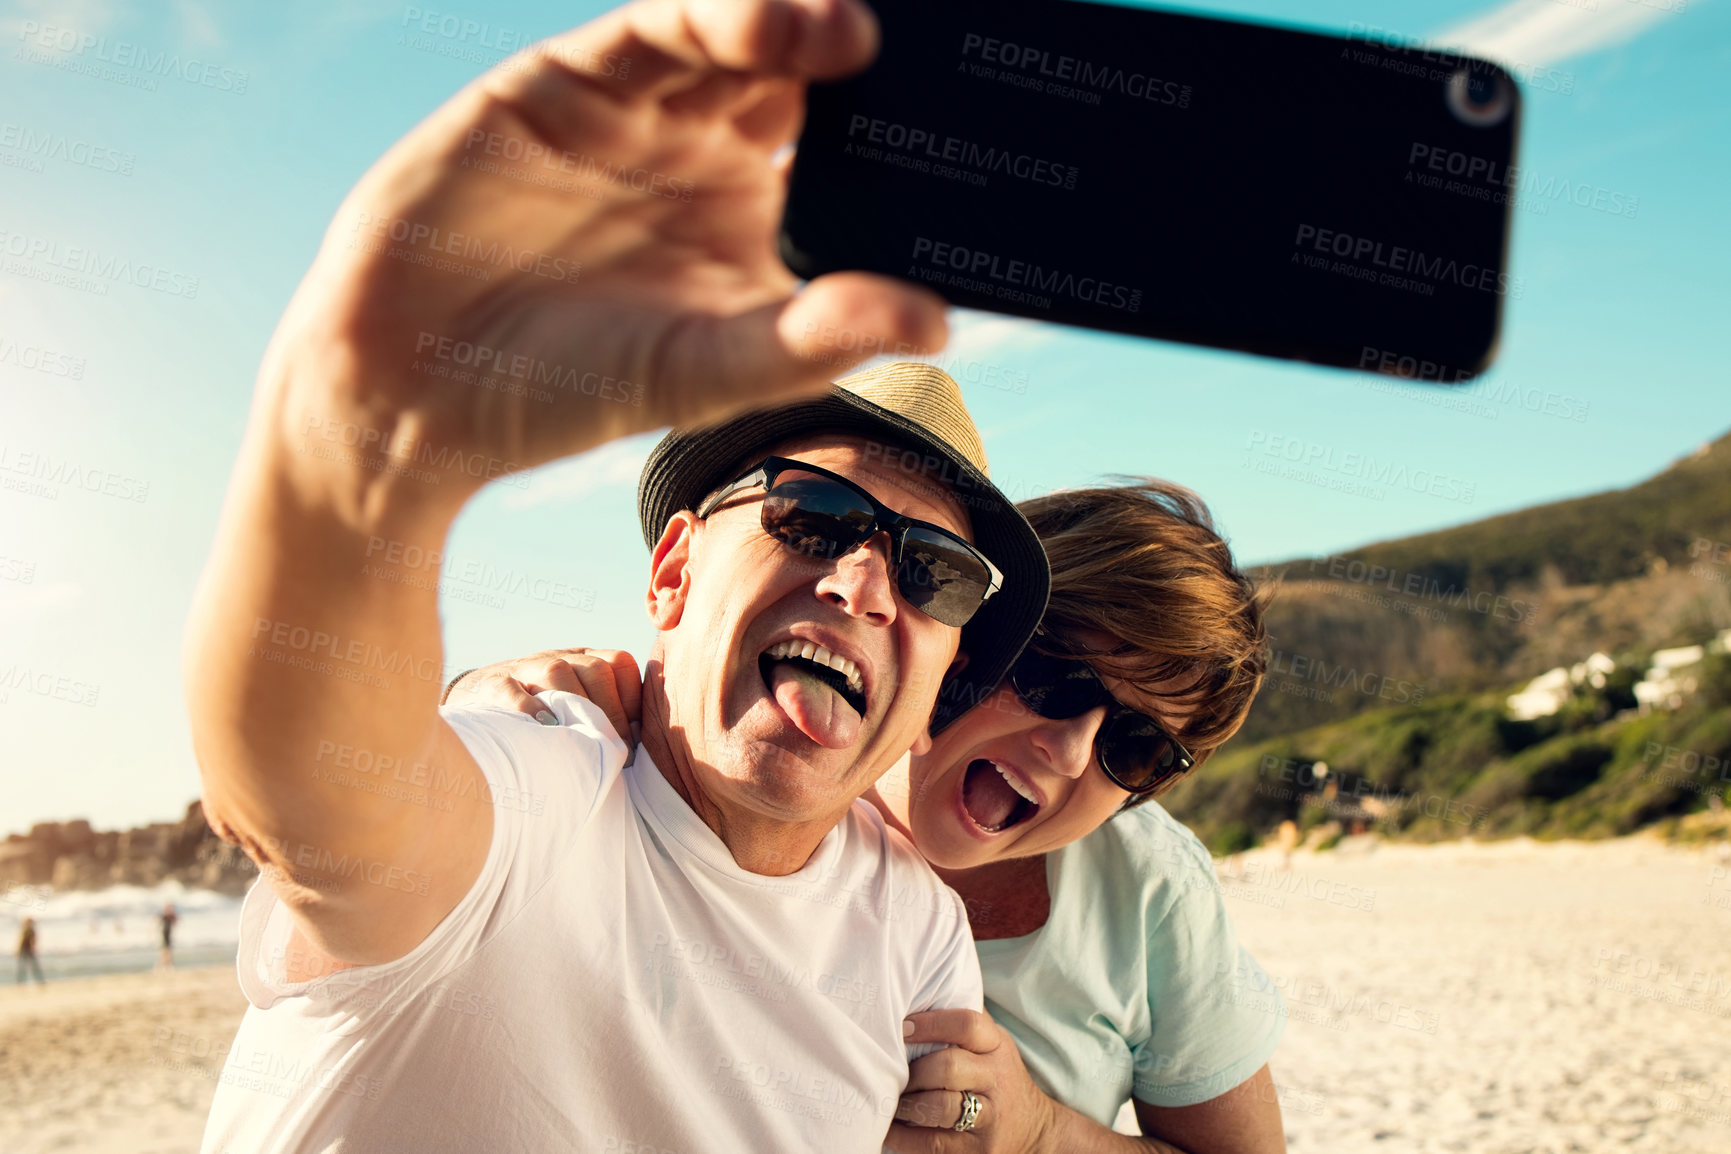 Buy stock photo Shot of a mature couple taking a selfie while spending the day at the beach